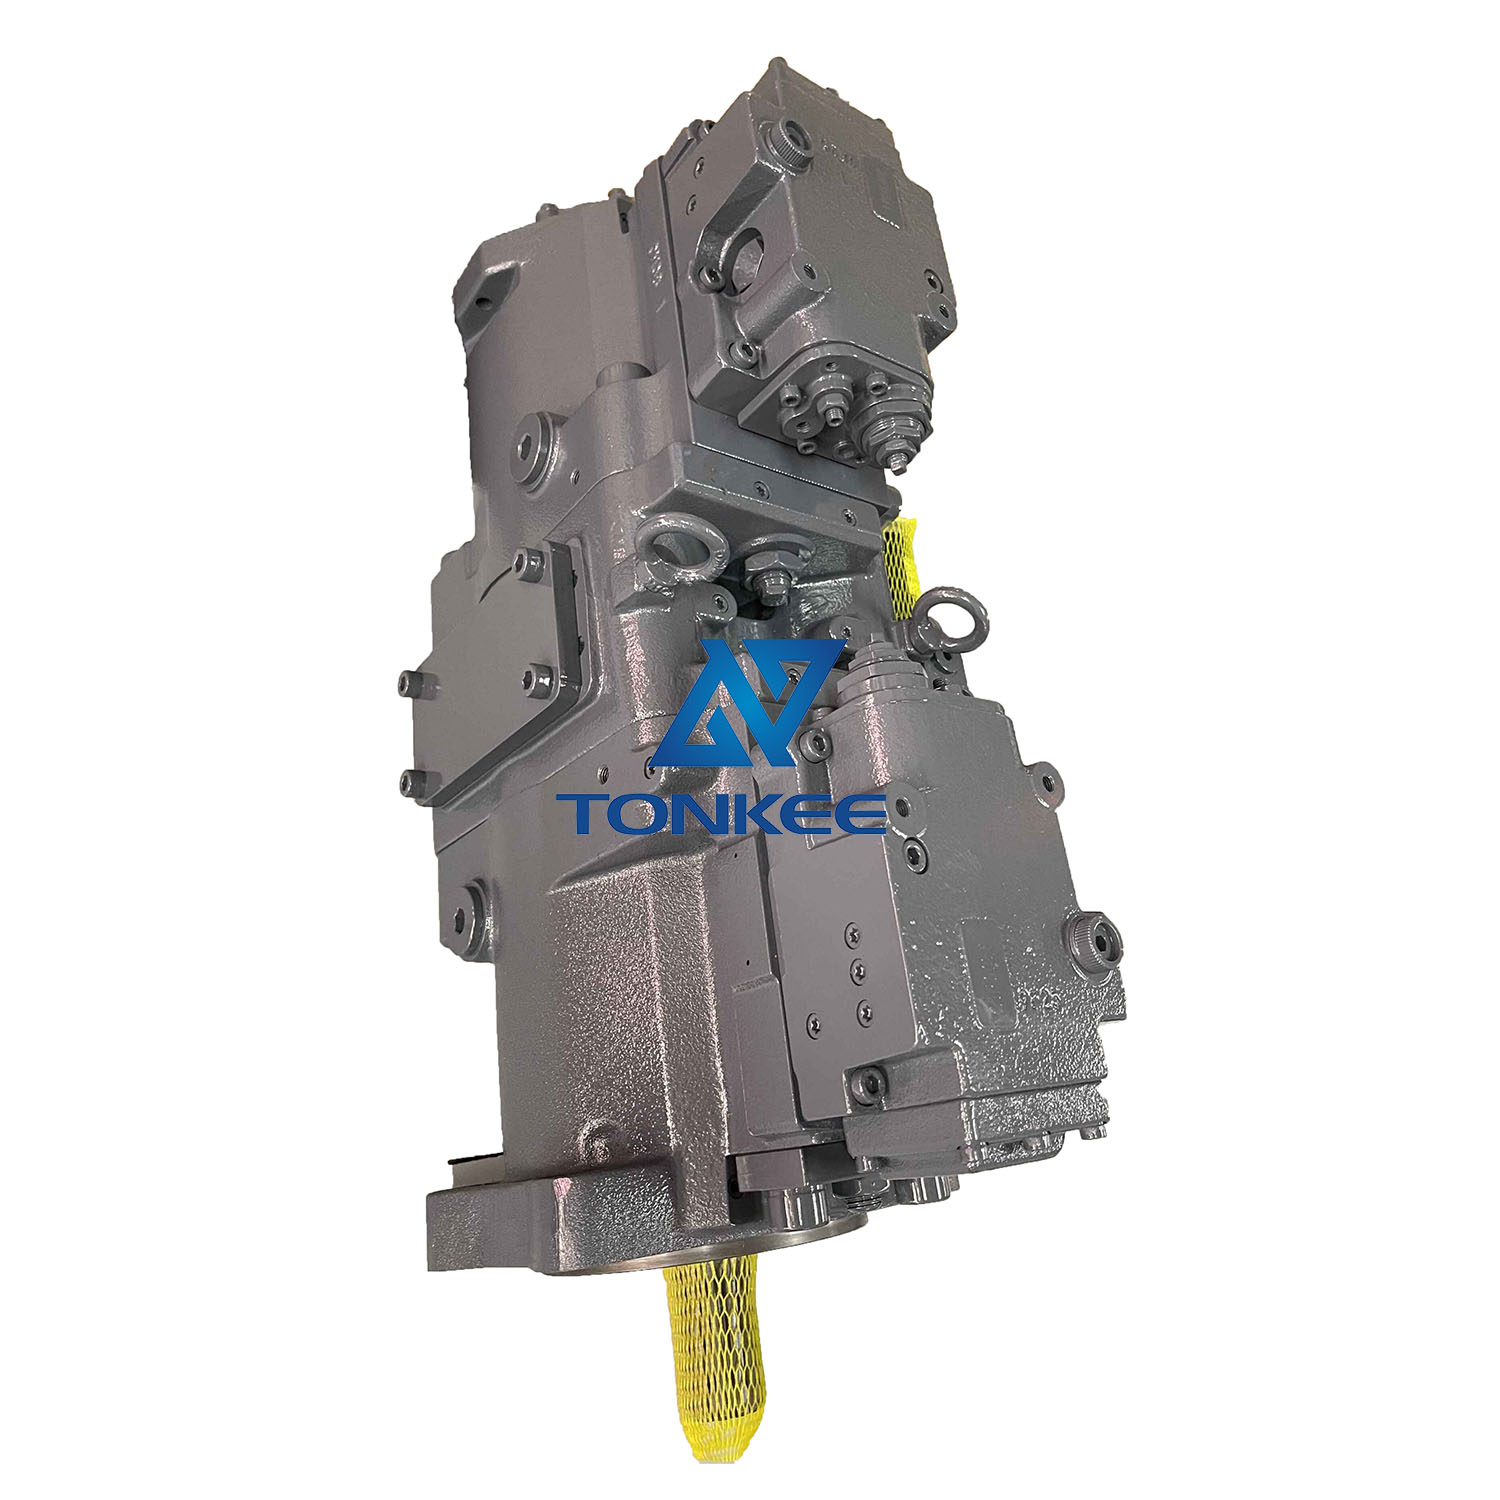 K7V125DTP hydraulic piston pump SY240 SY265 excavator main pump assembly fit for SANY